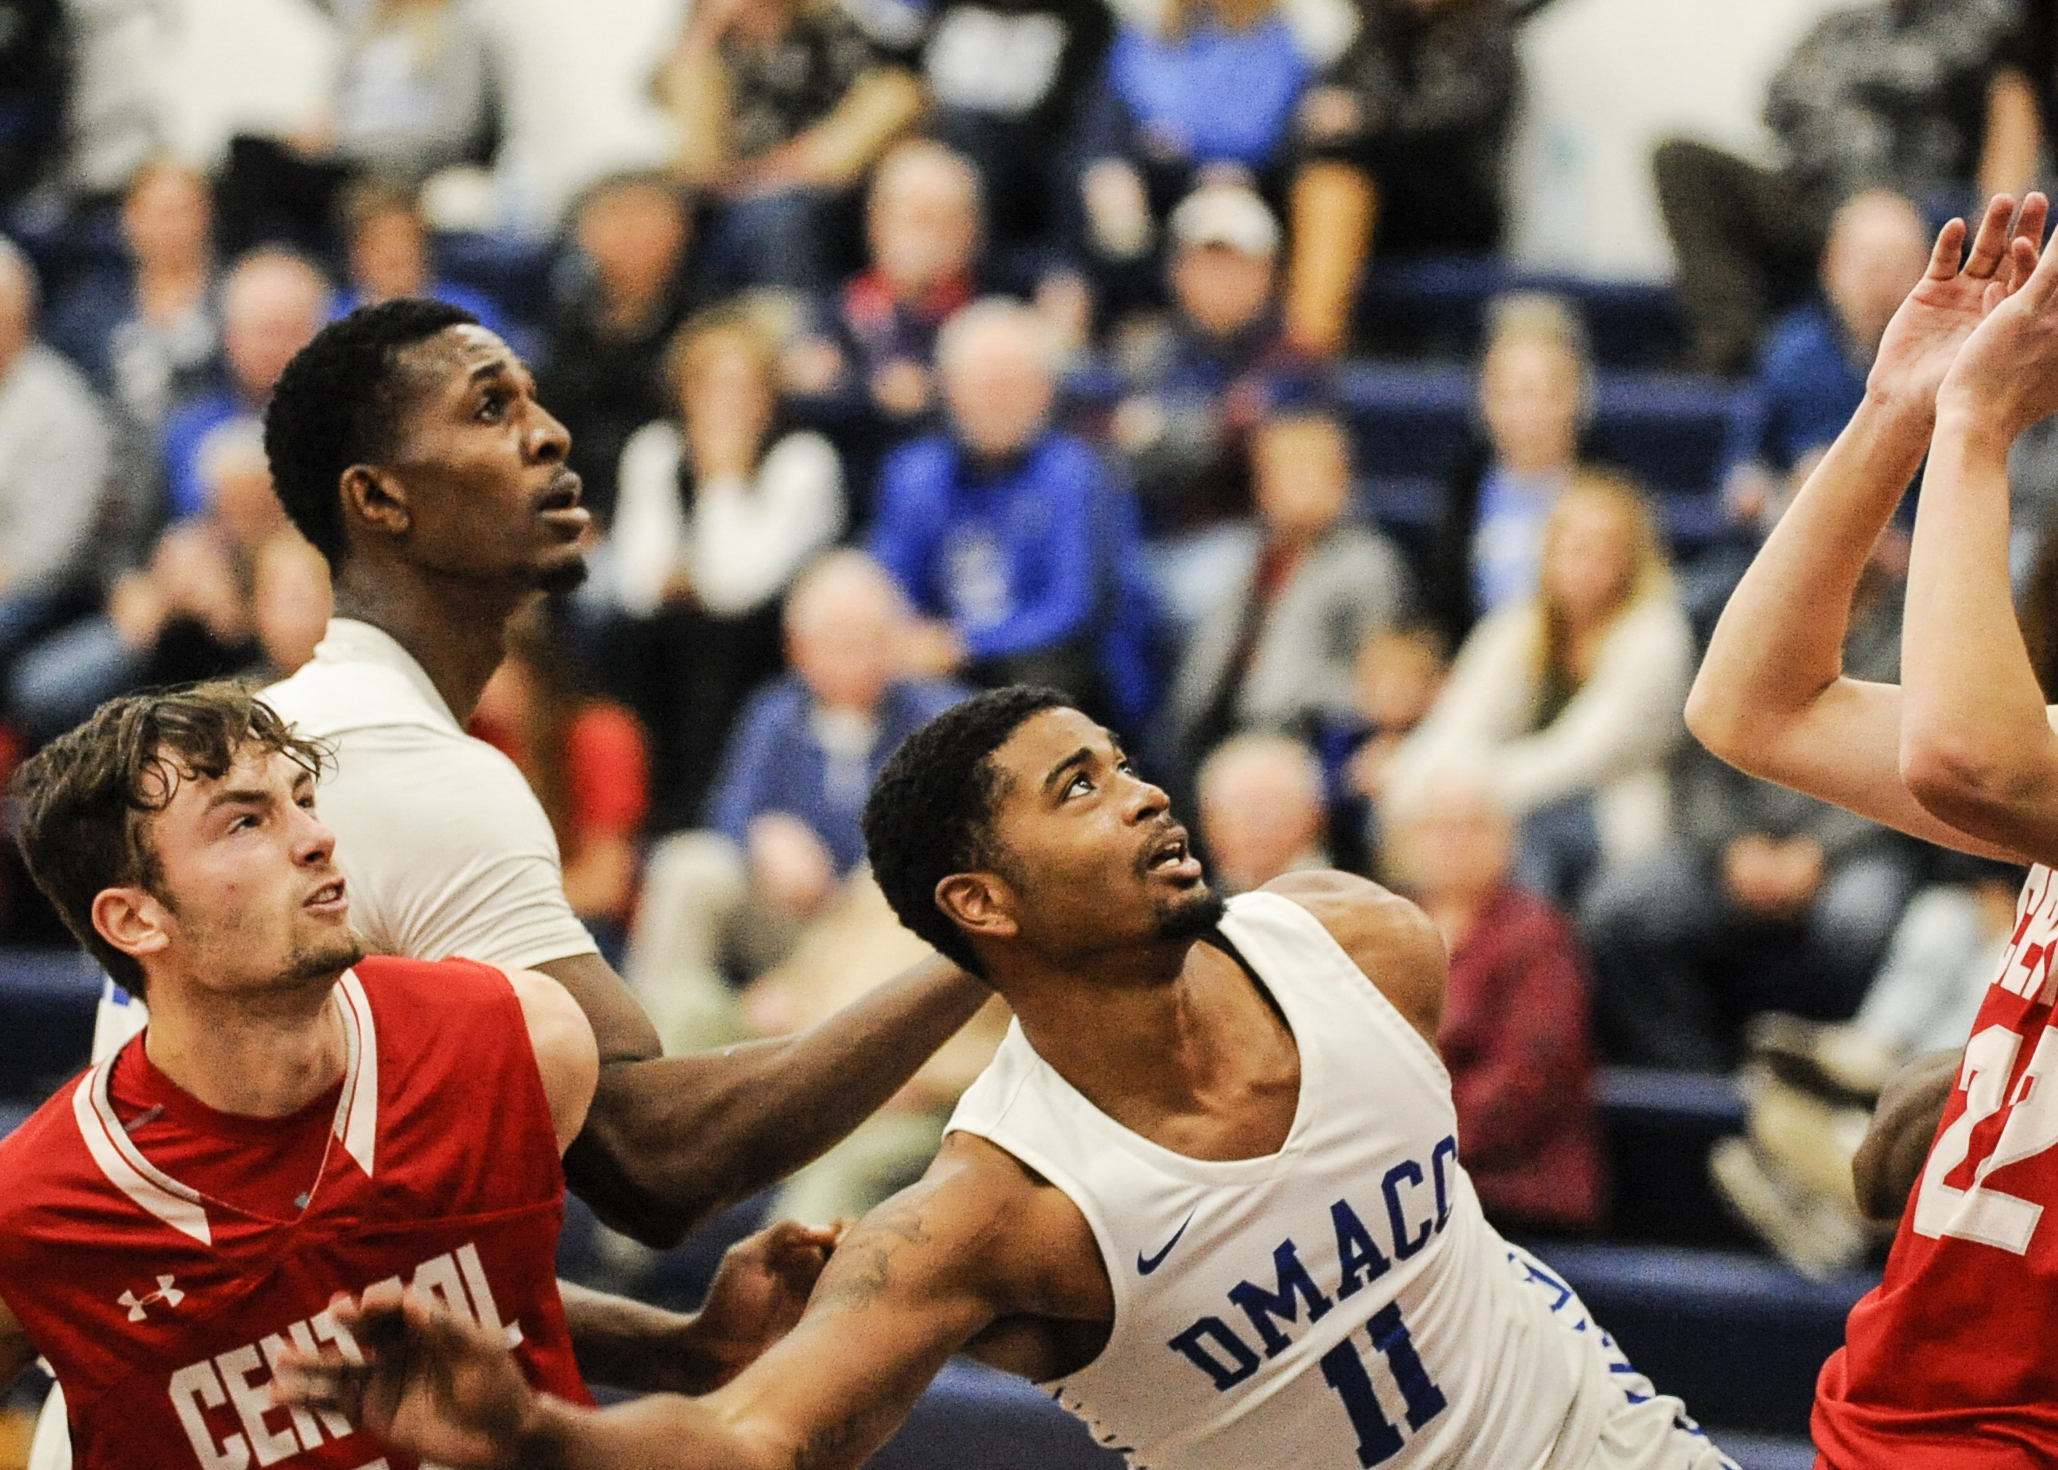 DMACC men's basketball team opens ICCAC play with 74-55 win